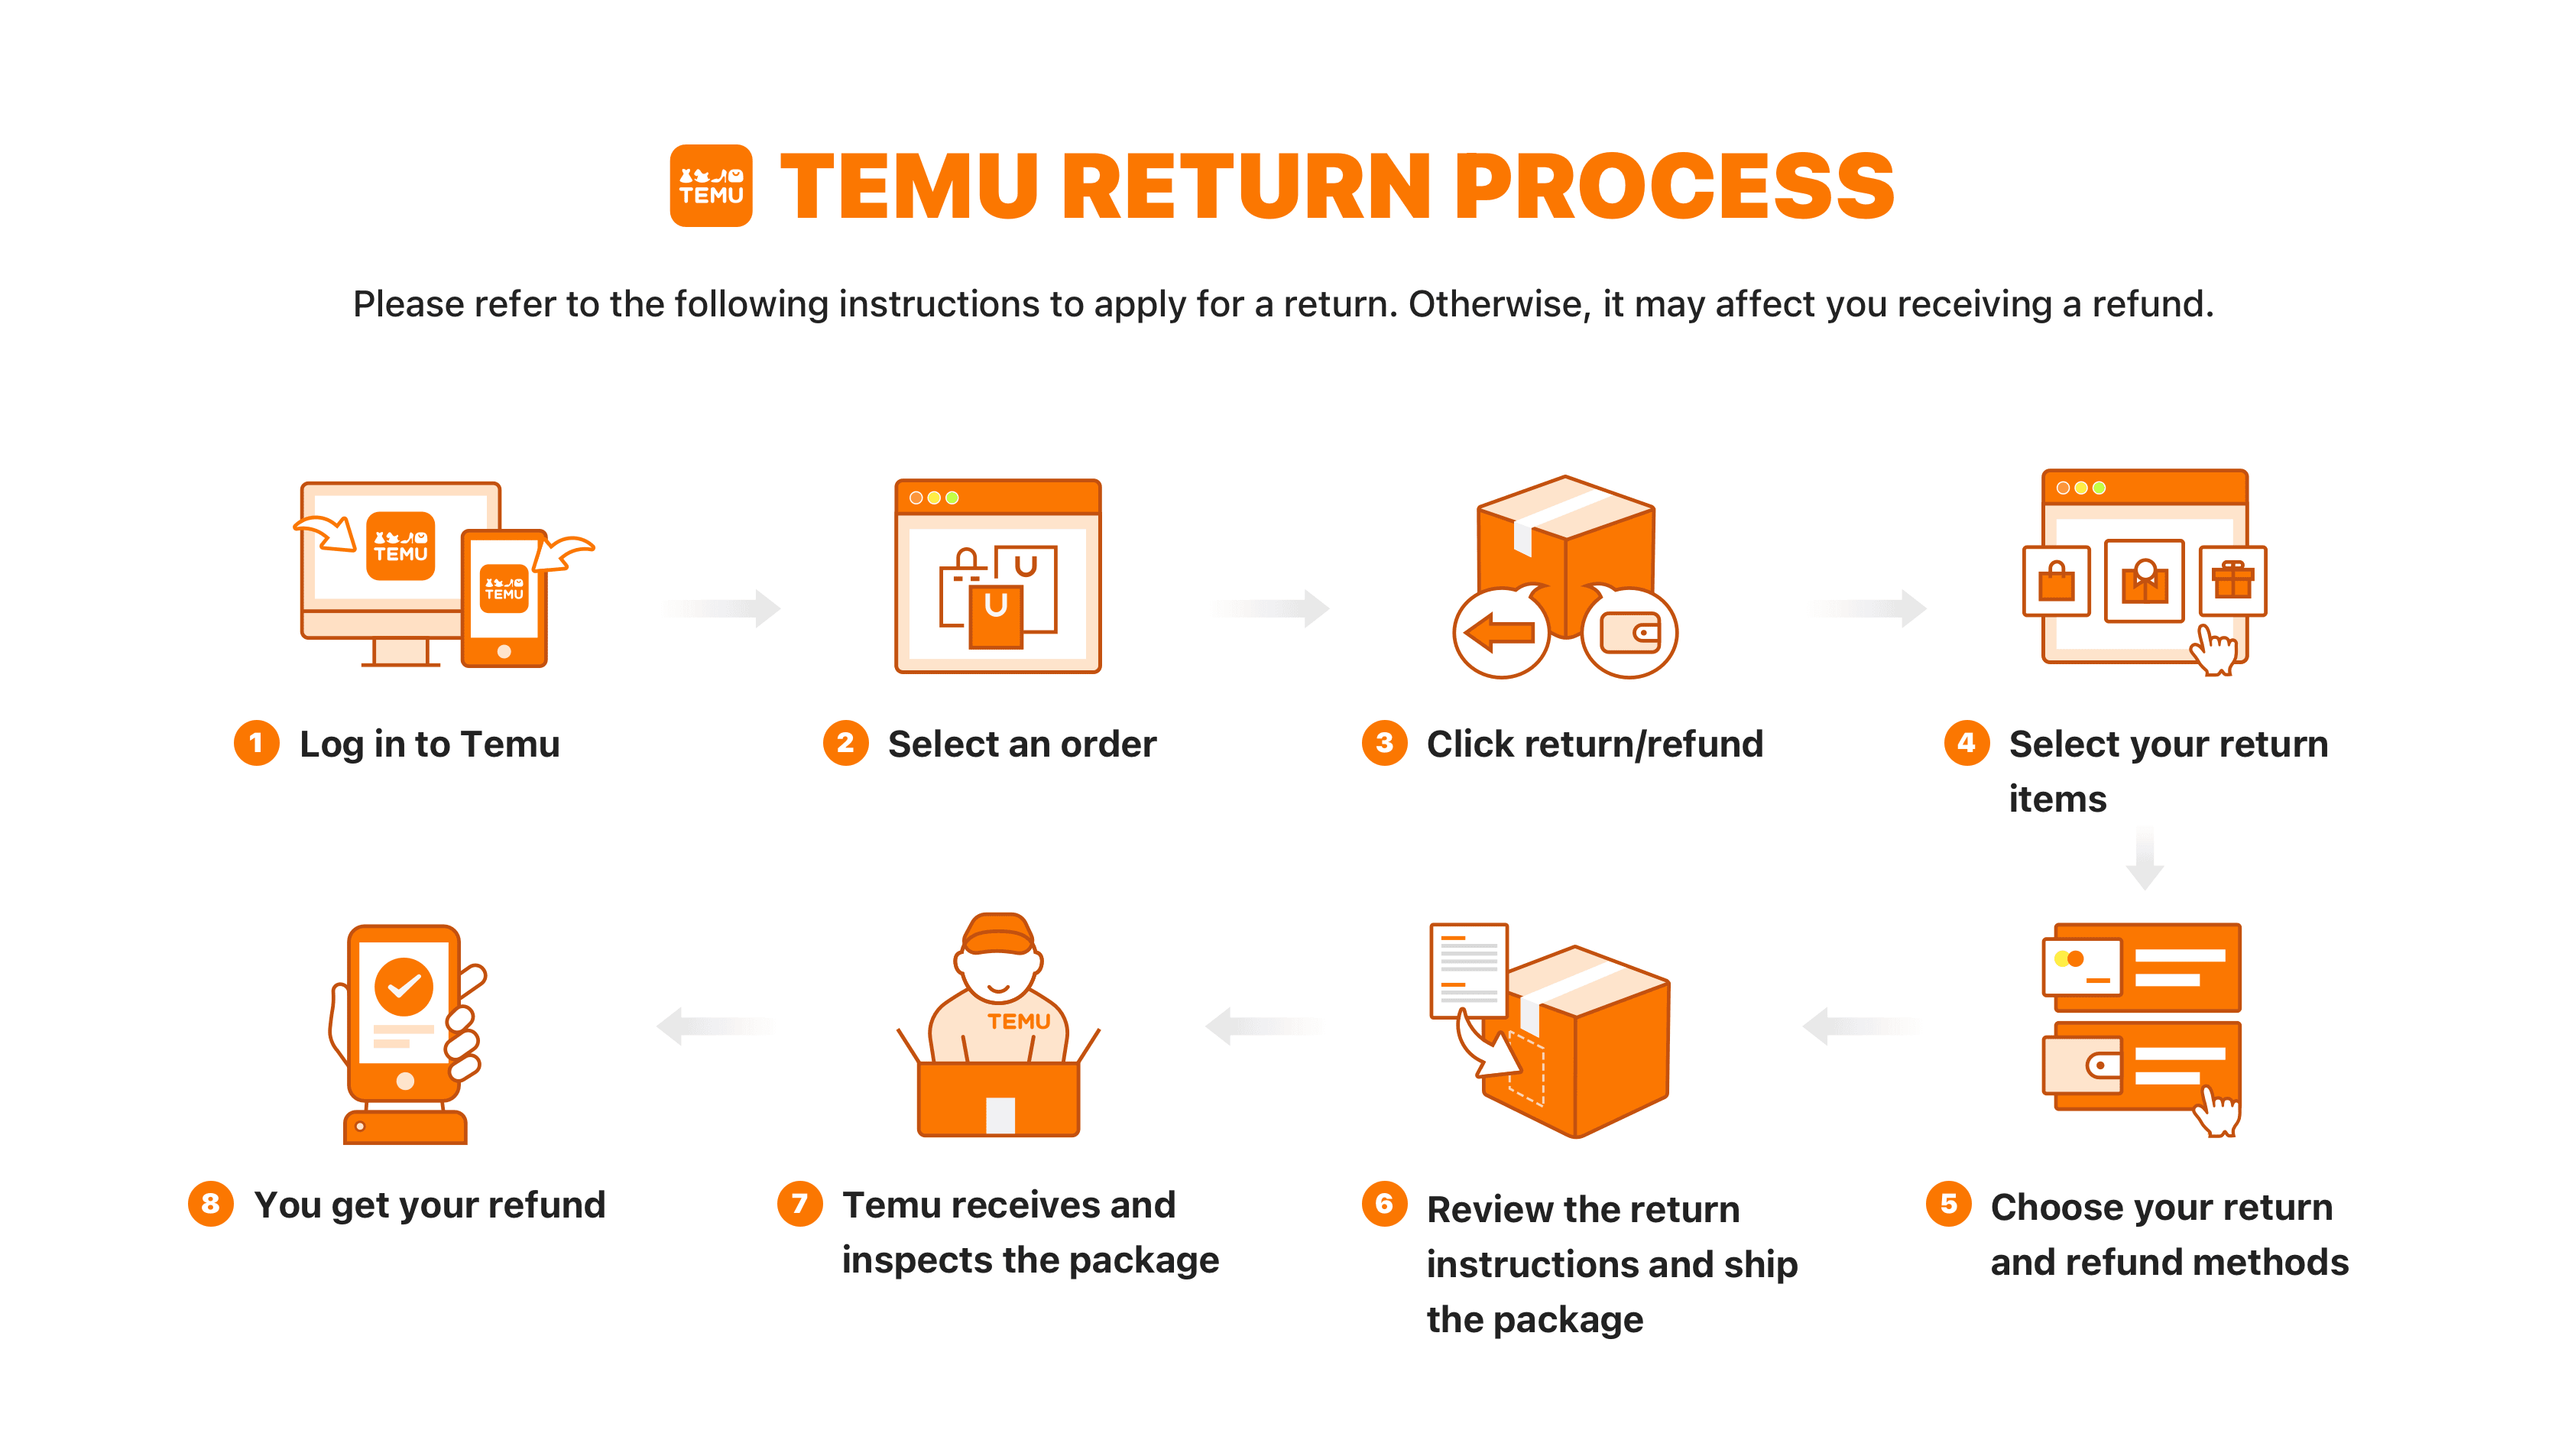 How To Return a Package